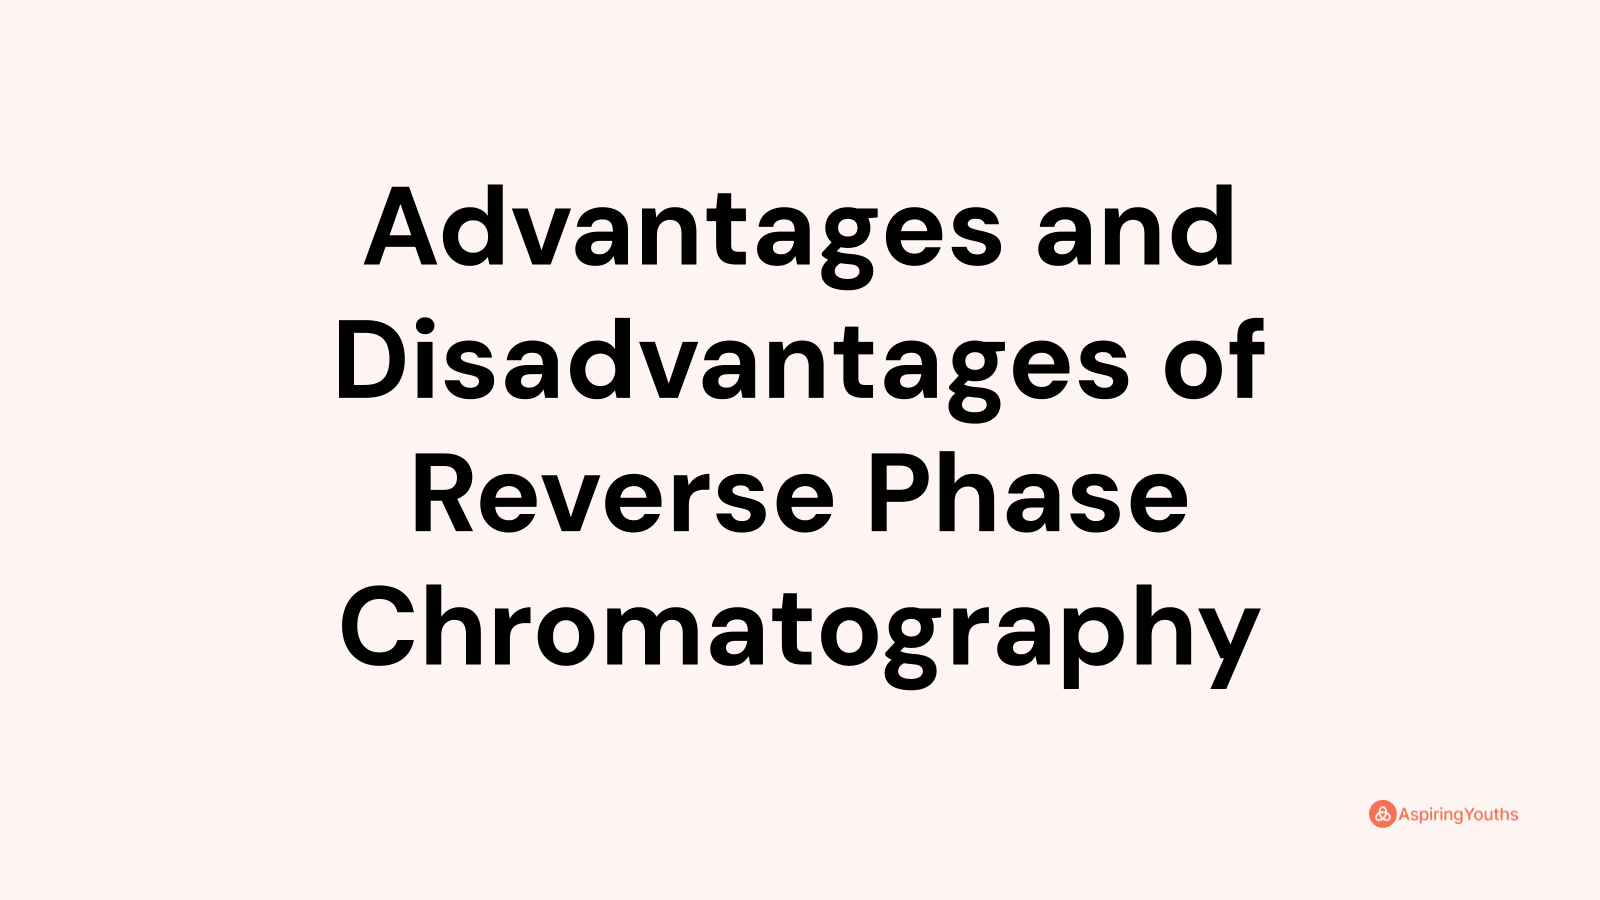 Advantages and disadvantages of Reverse Phase Chromatography